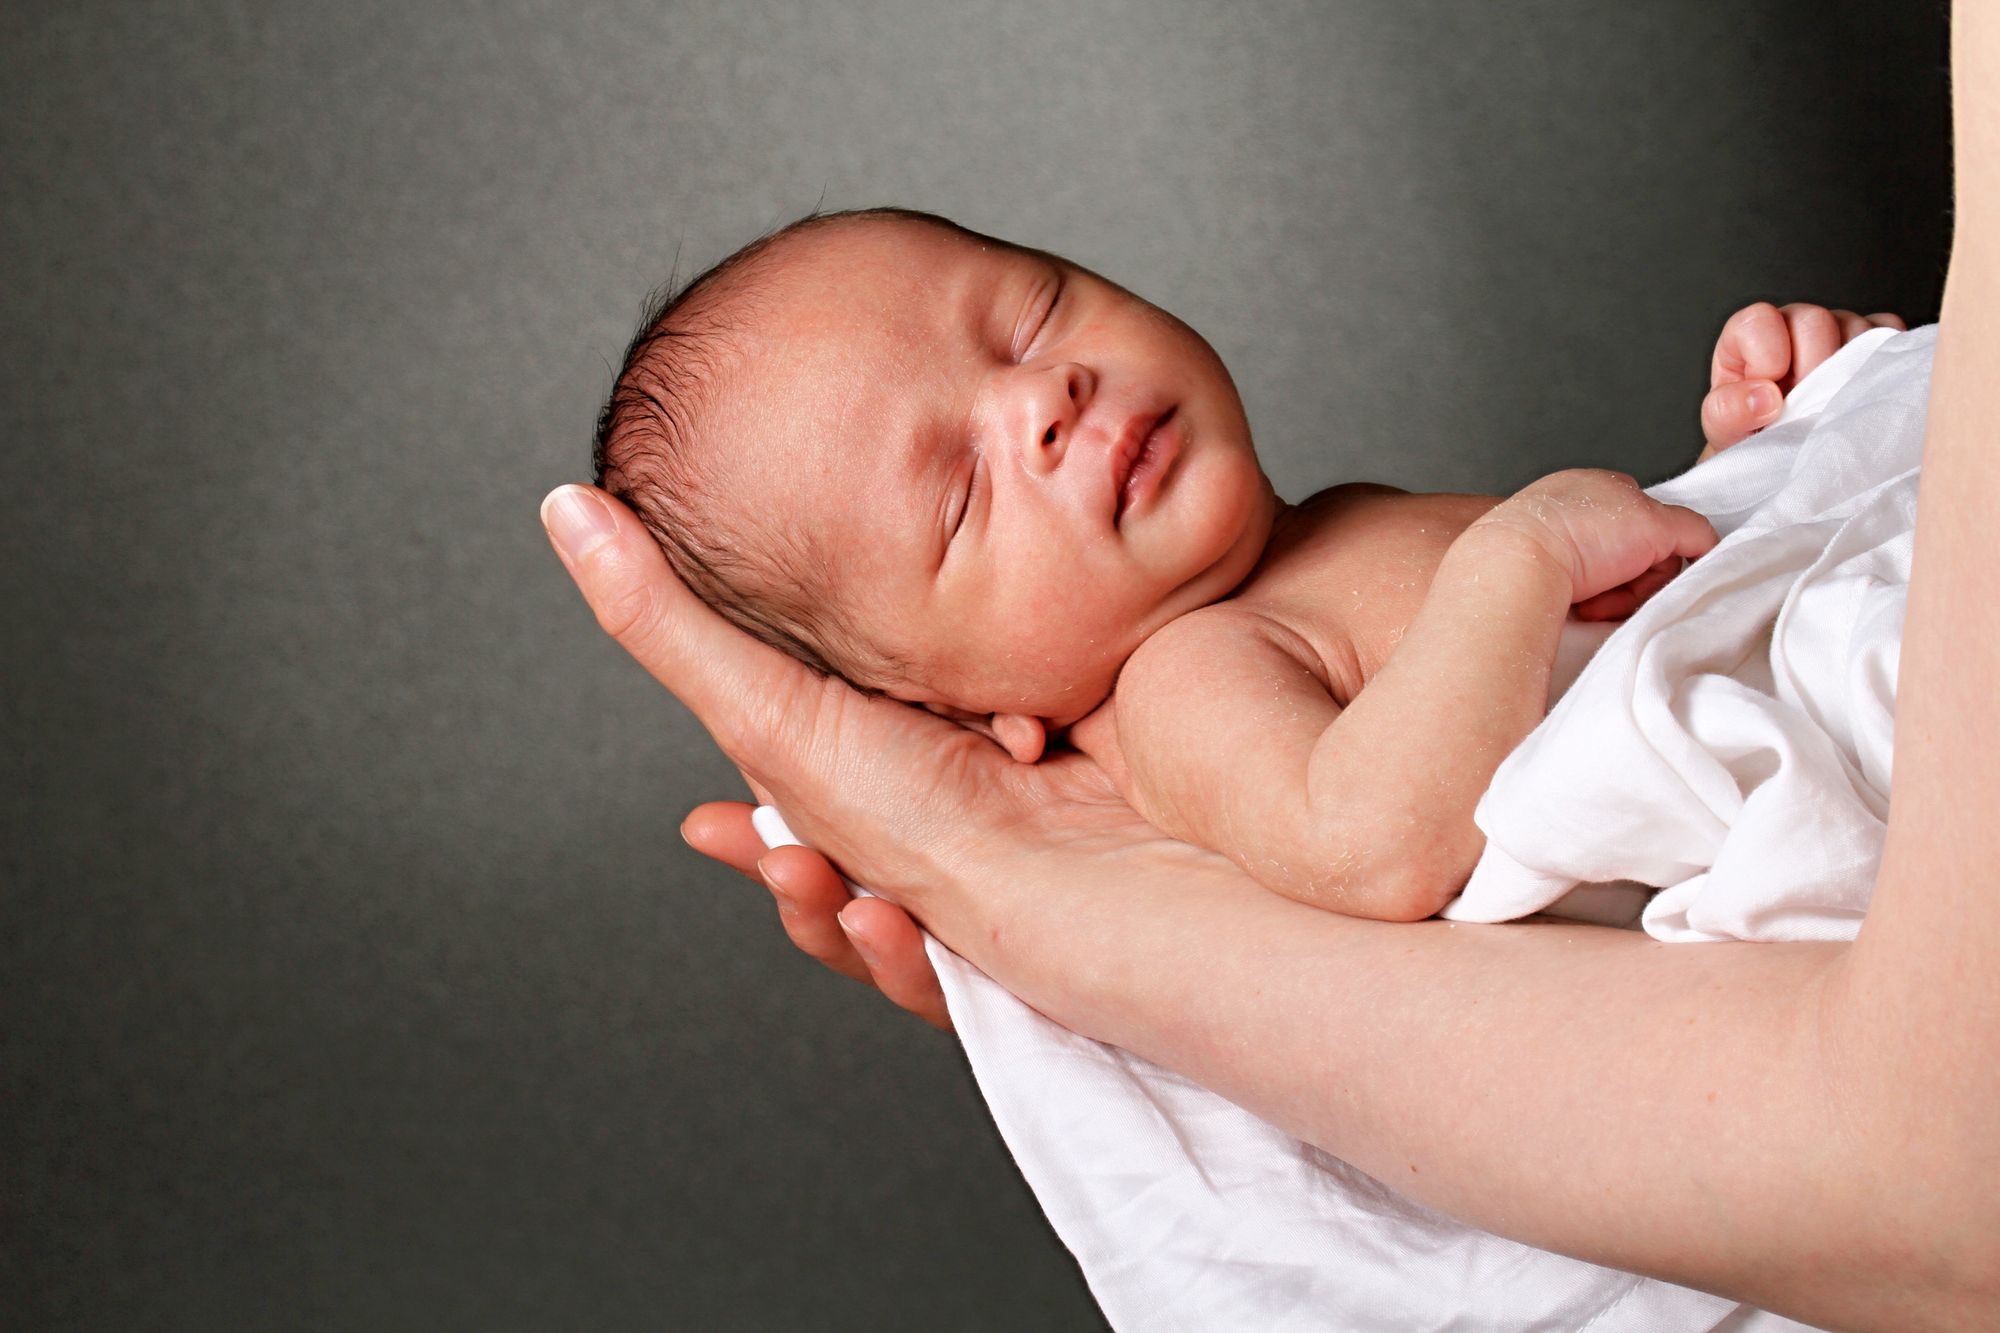 10 Things You Don’t Need To Buy For Your New-born